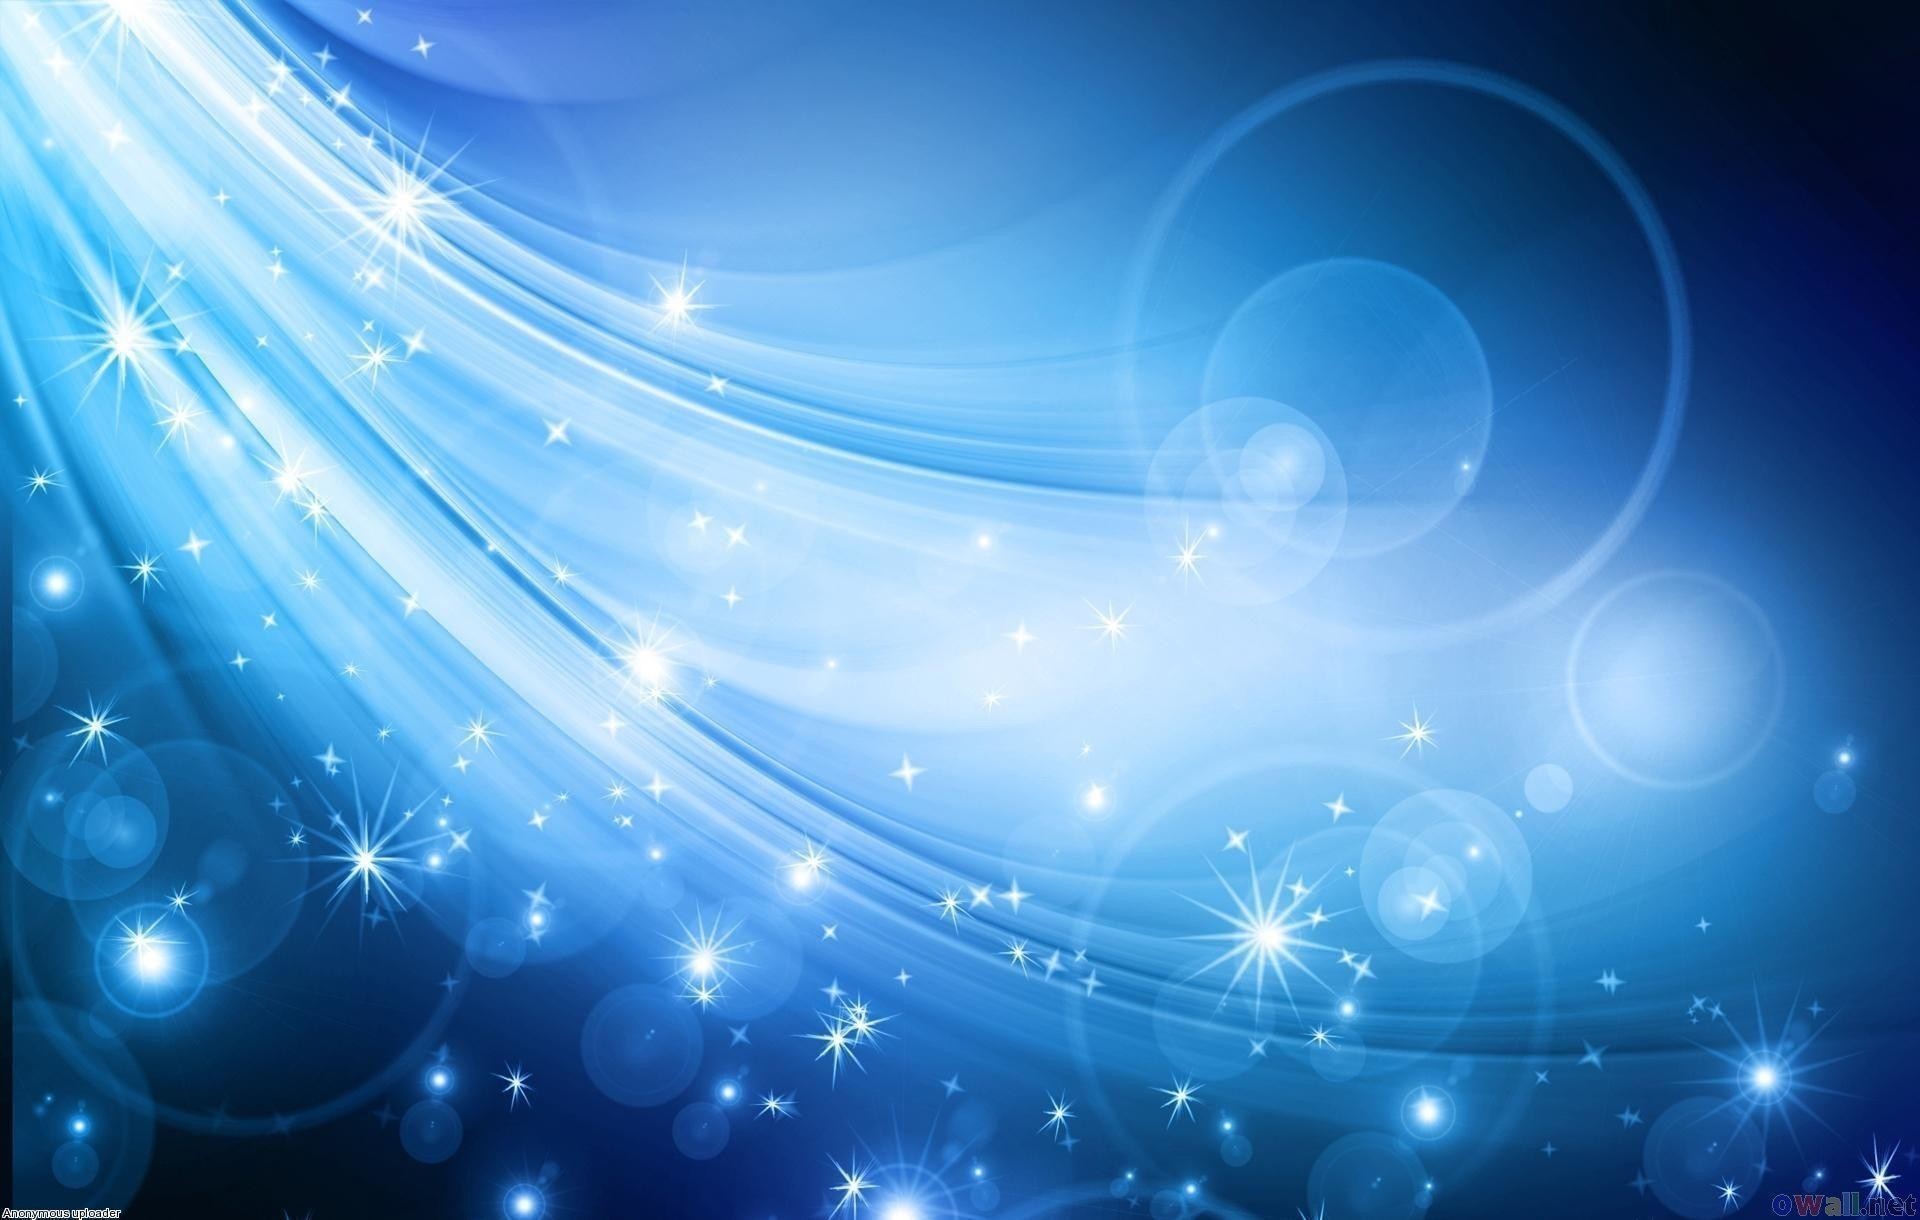 1920x1220 Wallpapers For > Sparkly Royal Blue Background